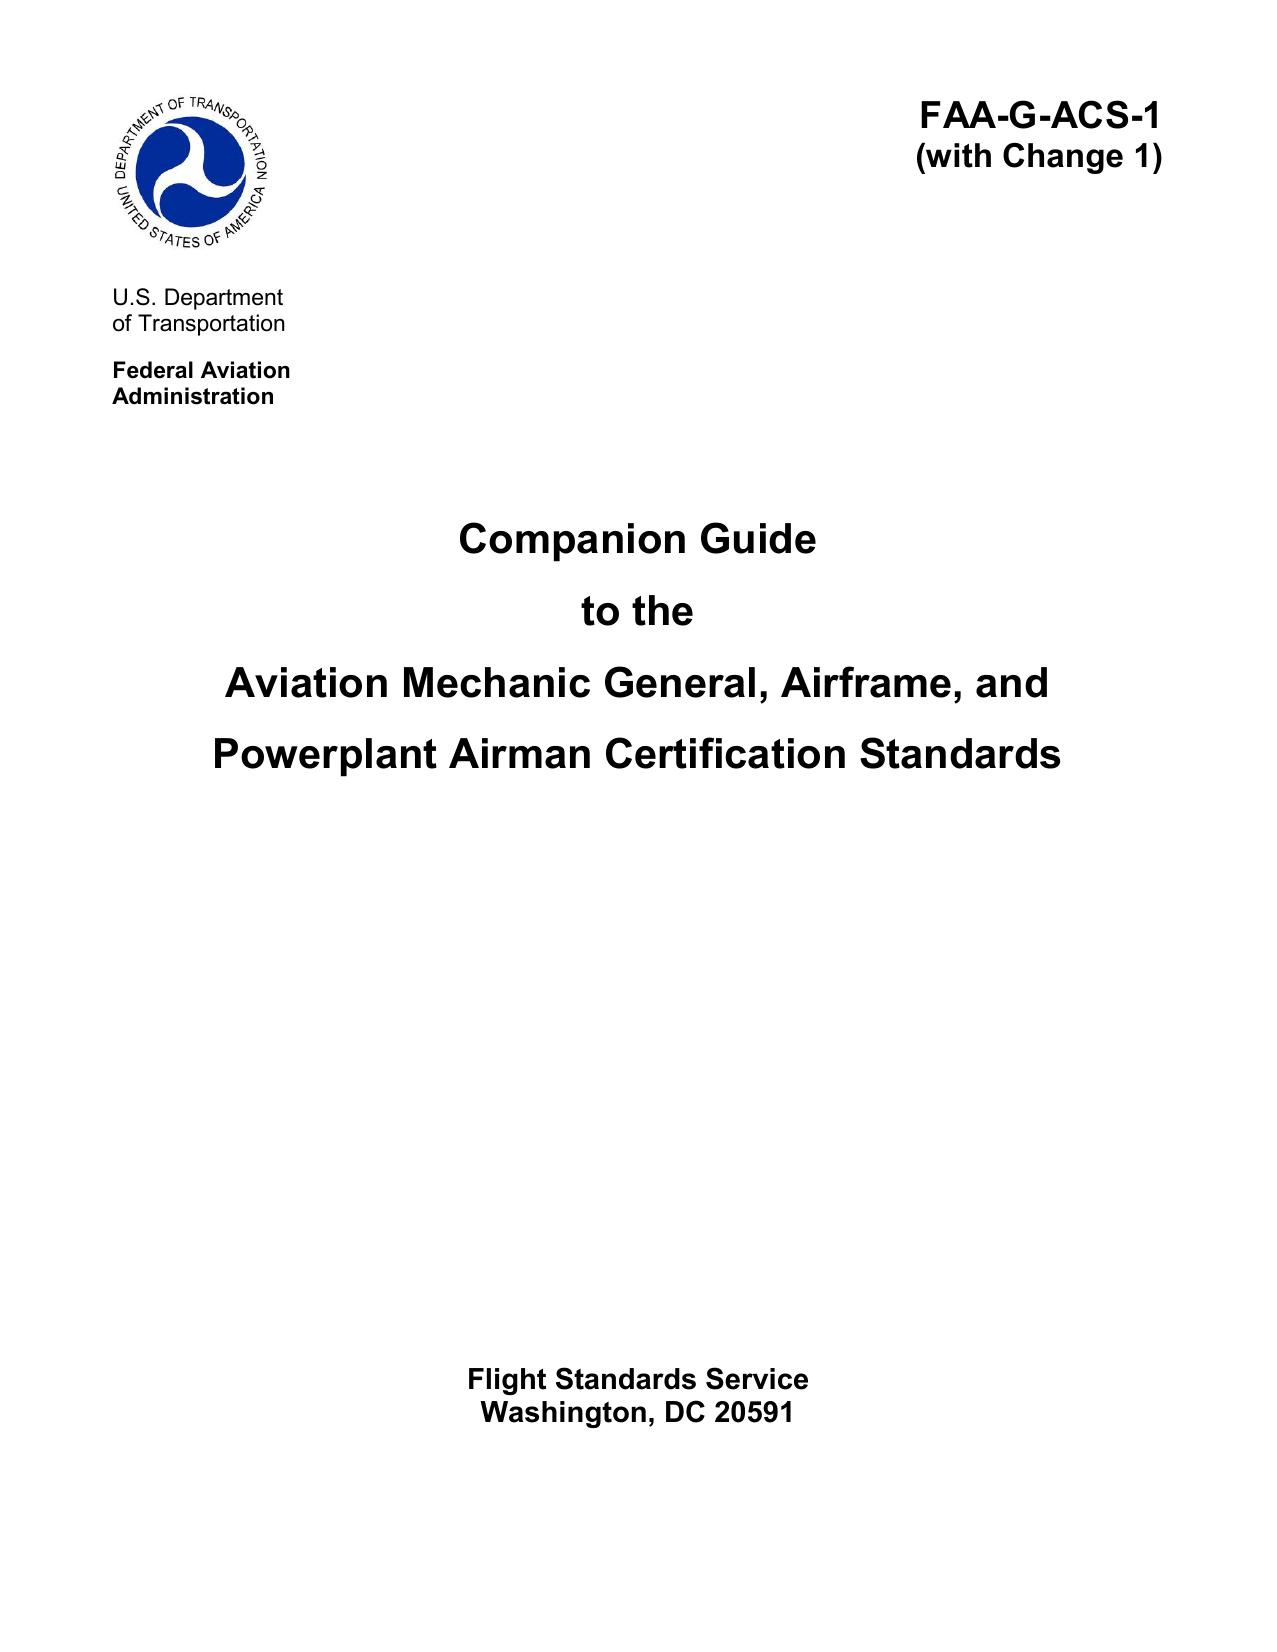 Companion Guide to the Aviation Mechanic General, Airframe, and Powerplant Airman Certification Standards